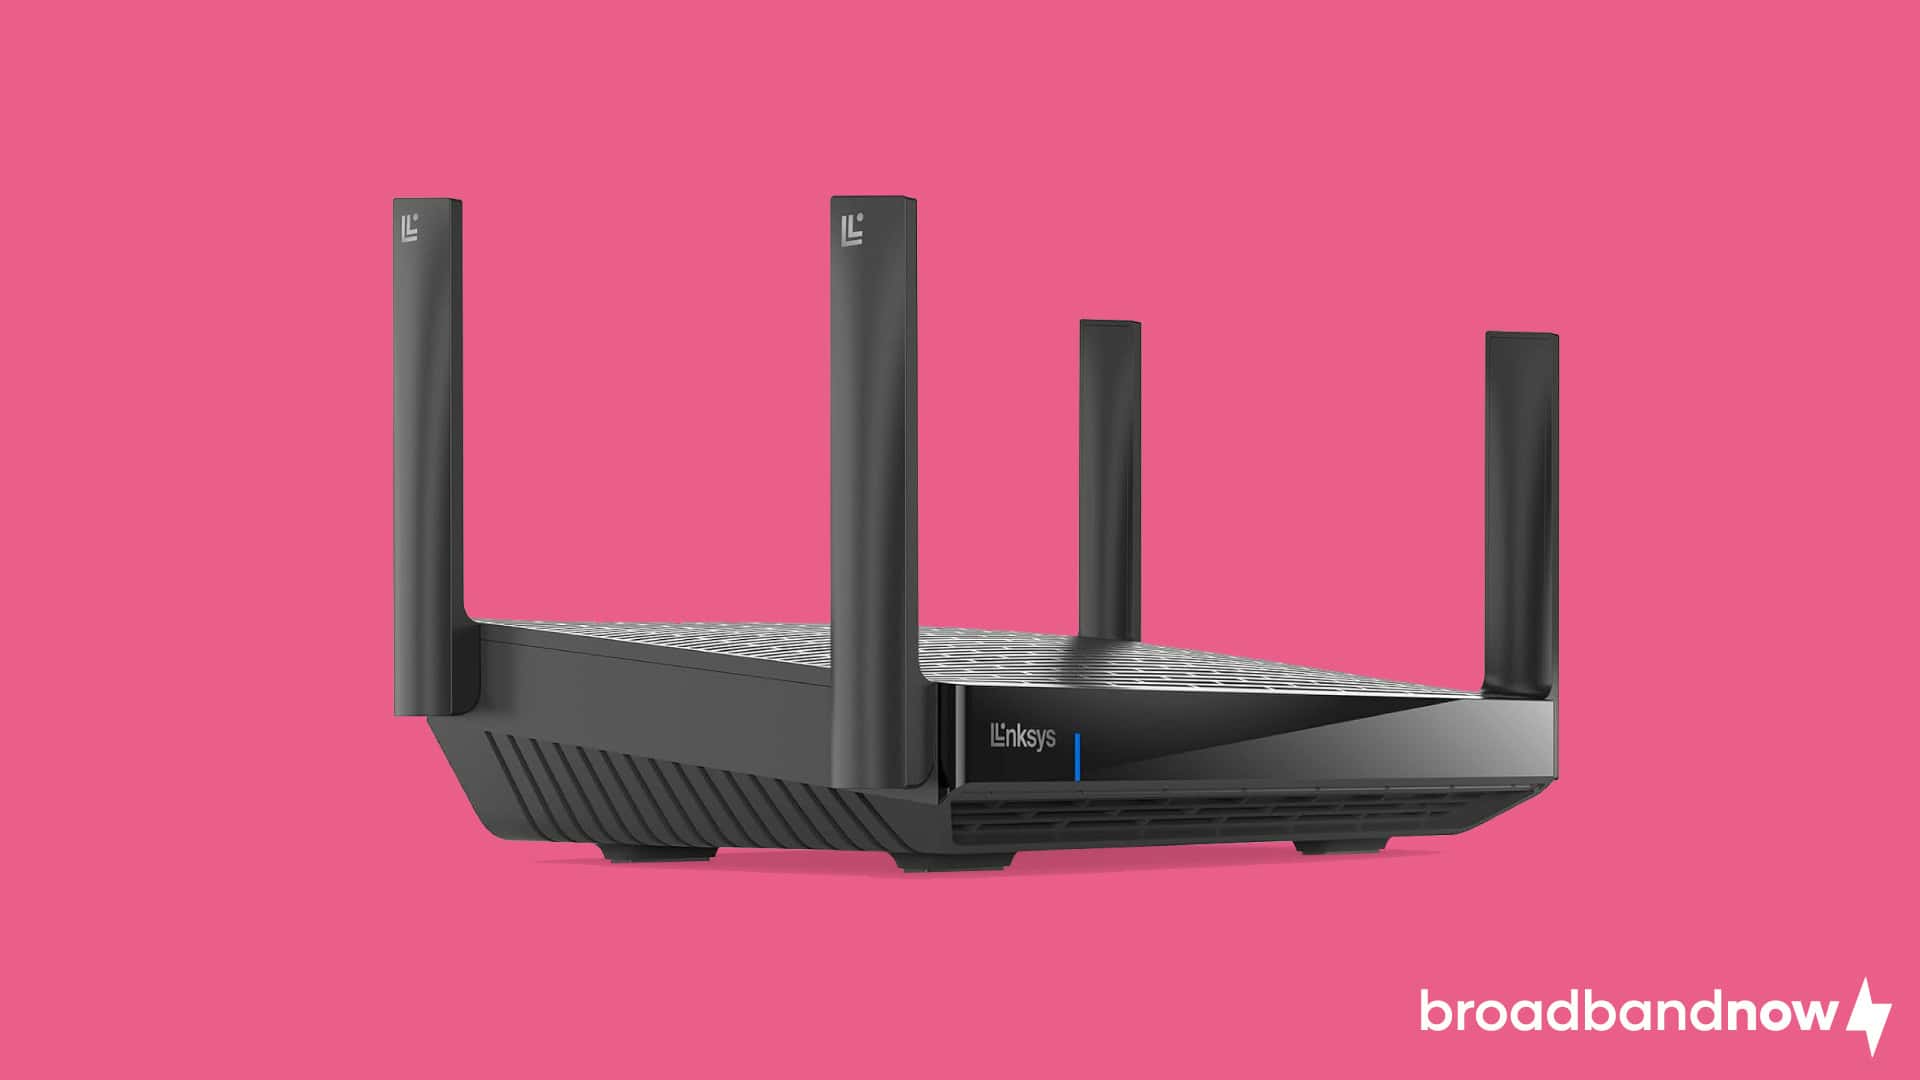 Image of a Linksys Hydra Pro 6E Wi-Fi router on a pink background